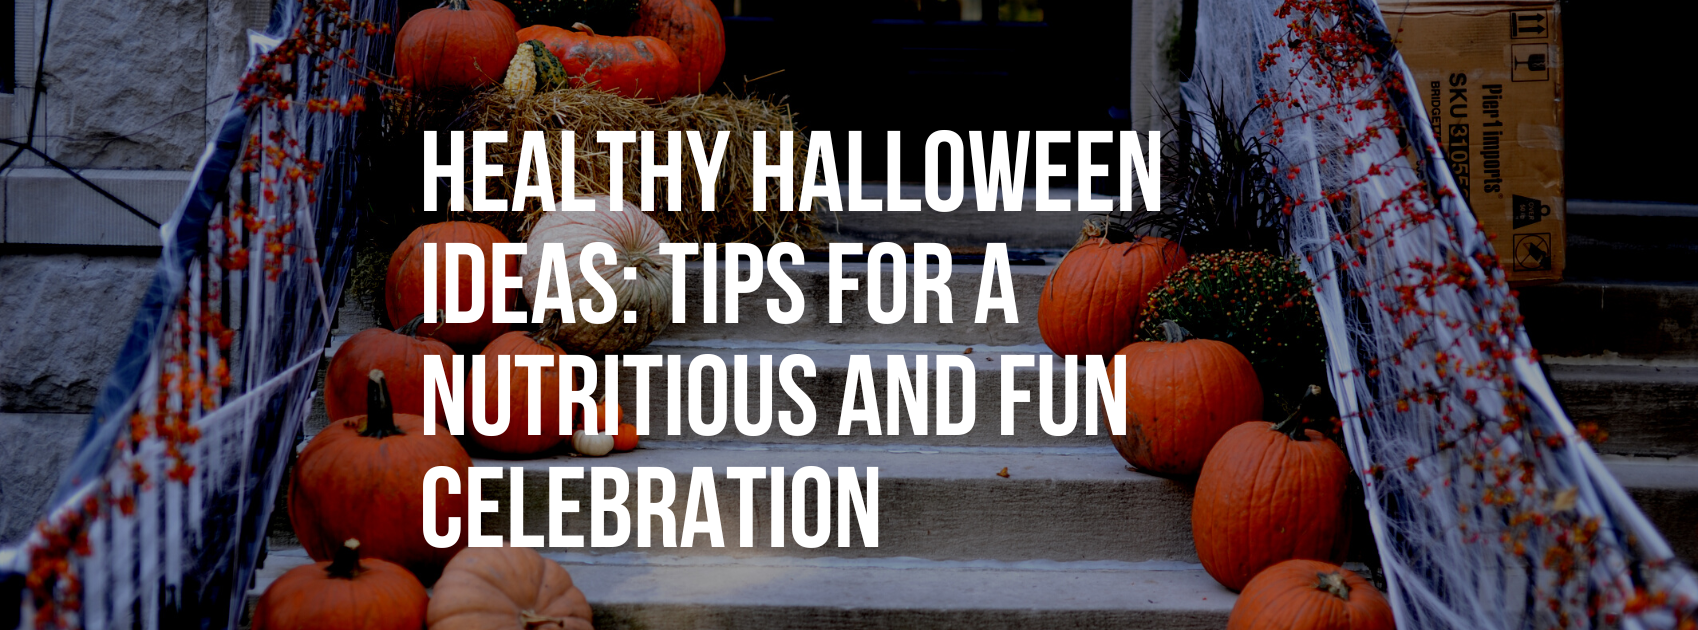 Healthy Halloween Ideas: Tips For a Nutritious and Fun Celebration